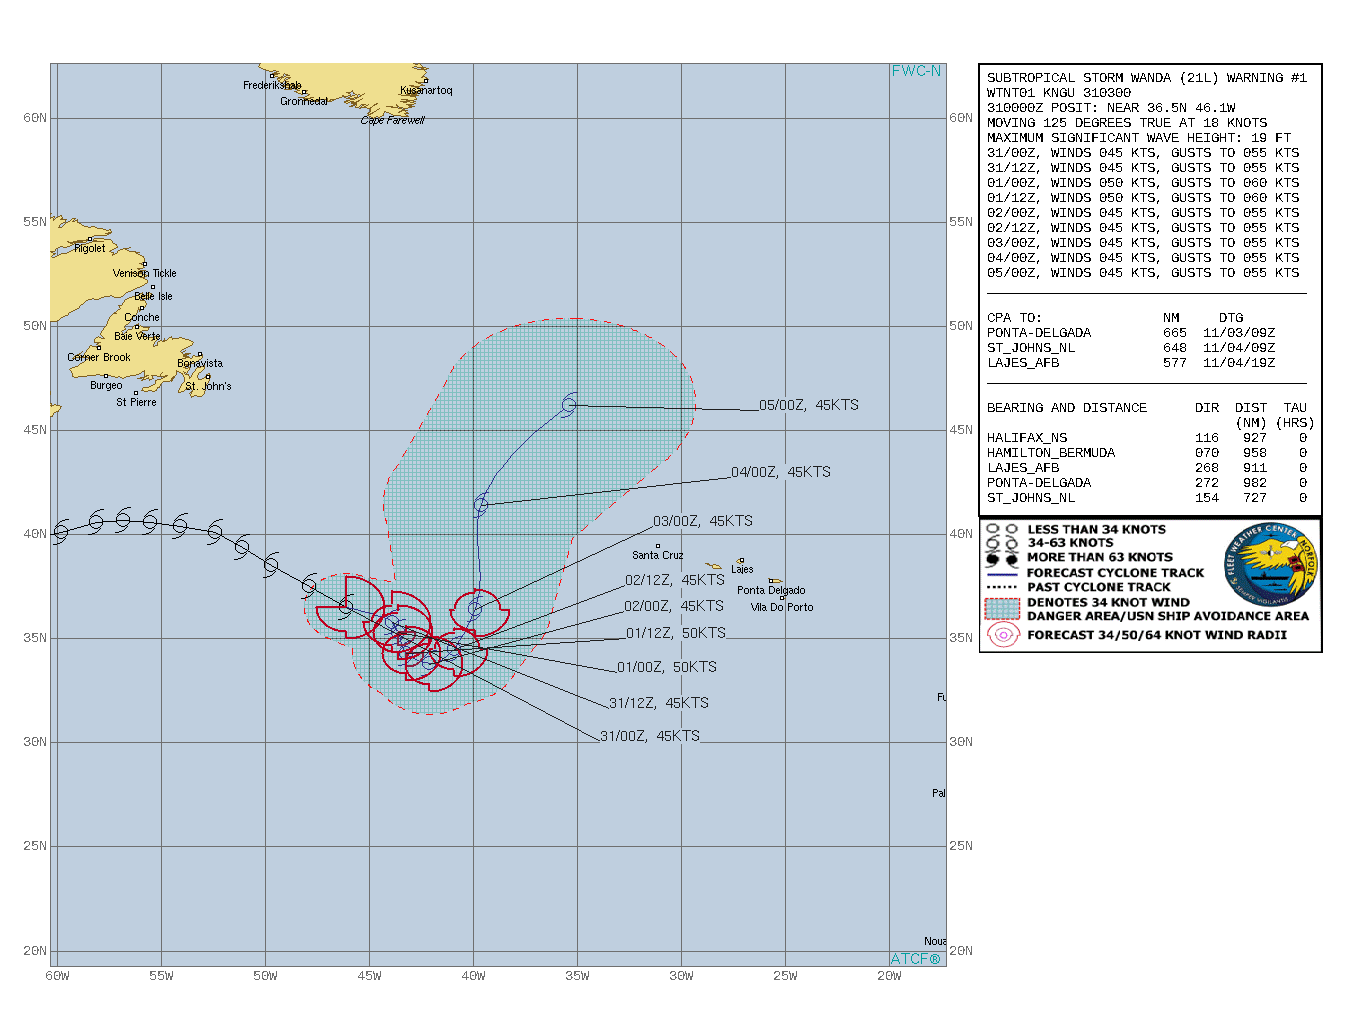 Invest 90W removed from the map//Invest 93S down-graded to Low//21L(WANDA) is subtropical and intensifying, 31/10utc updates